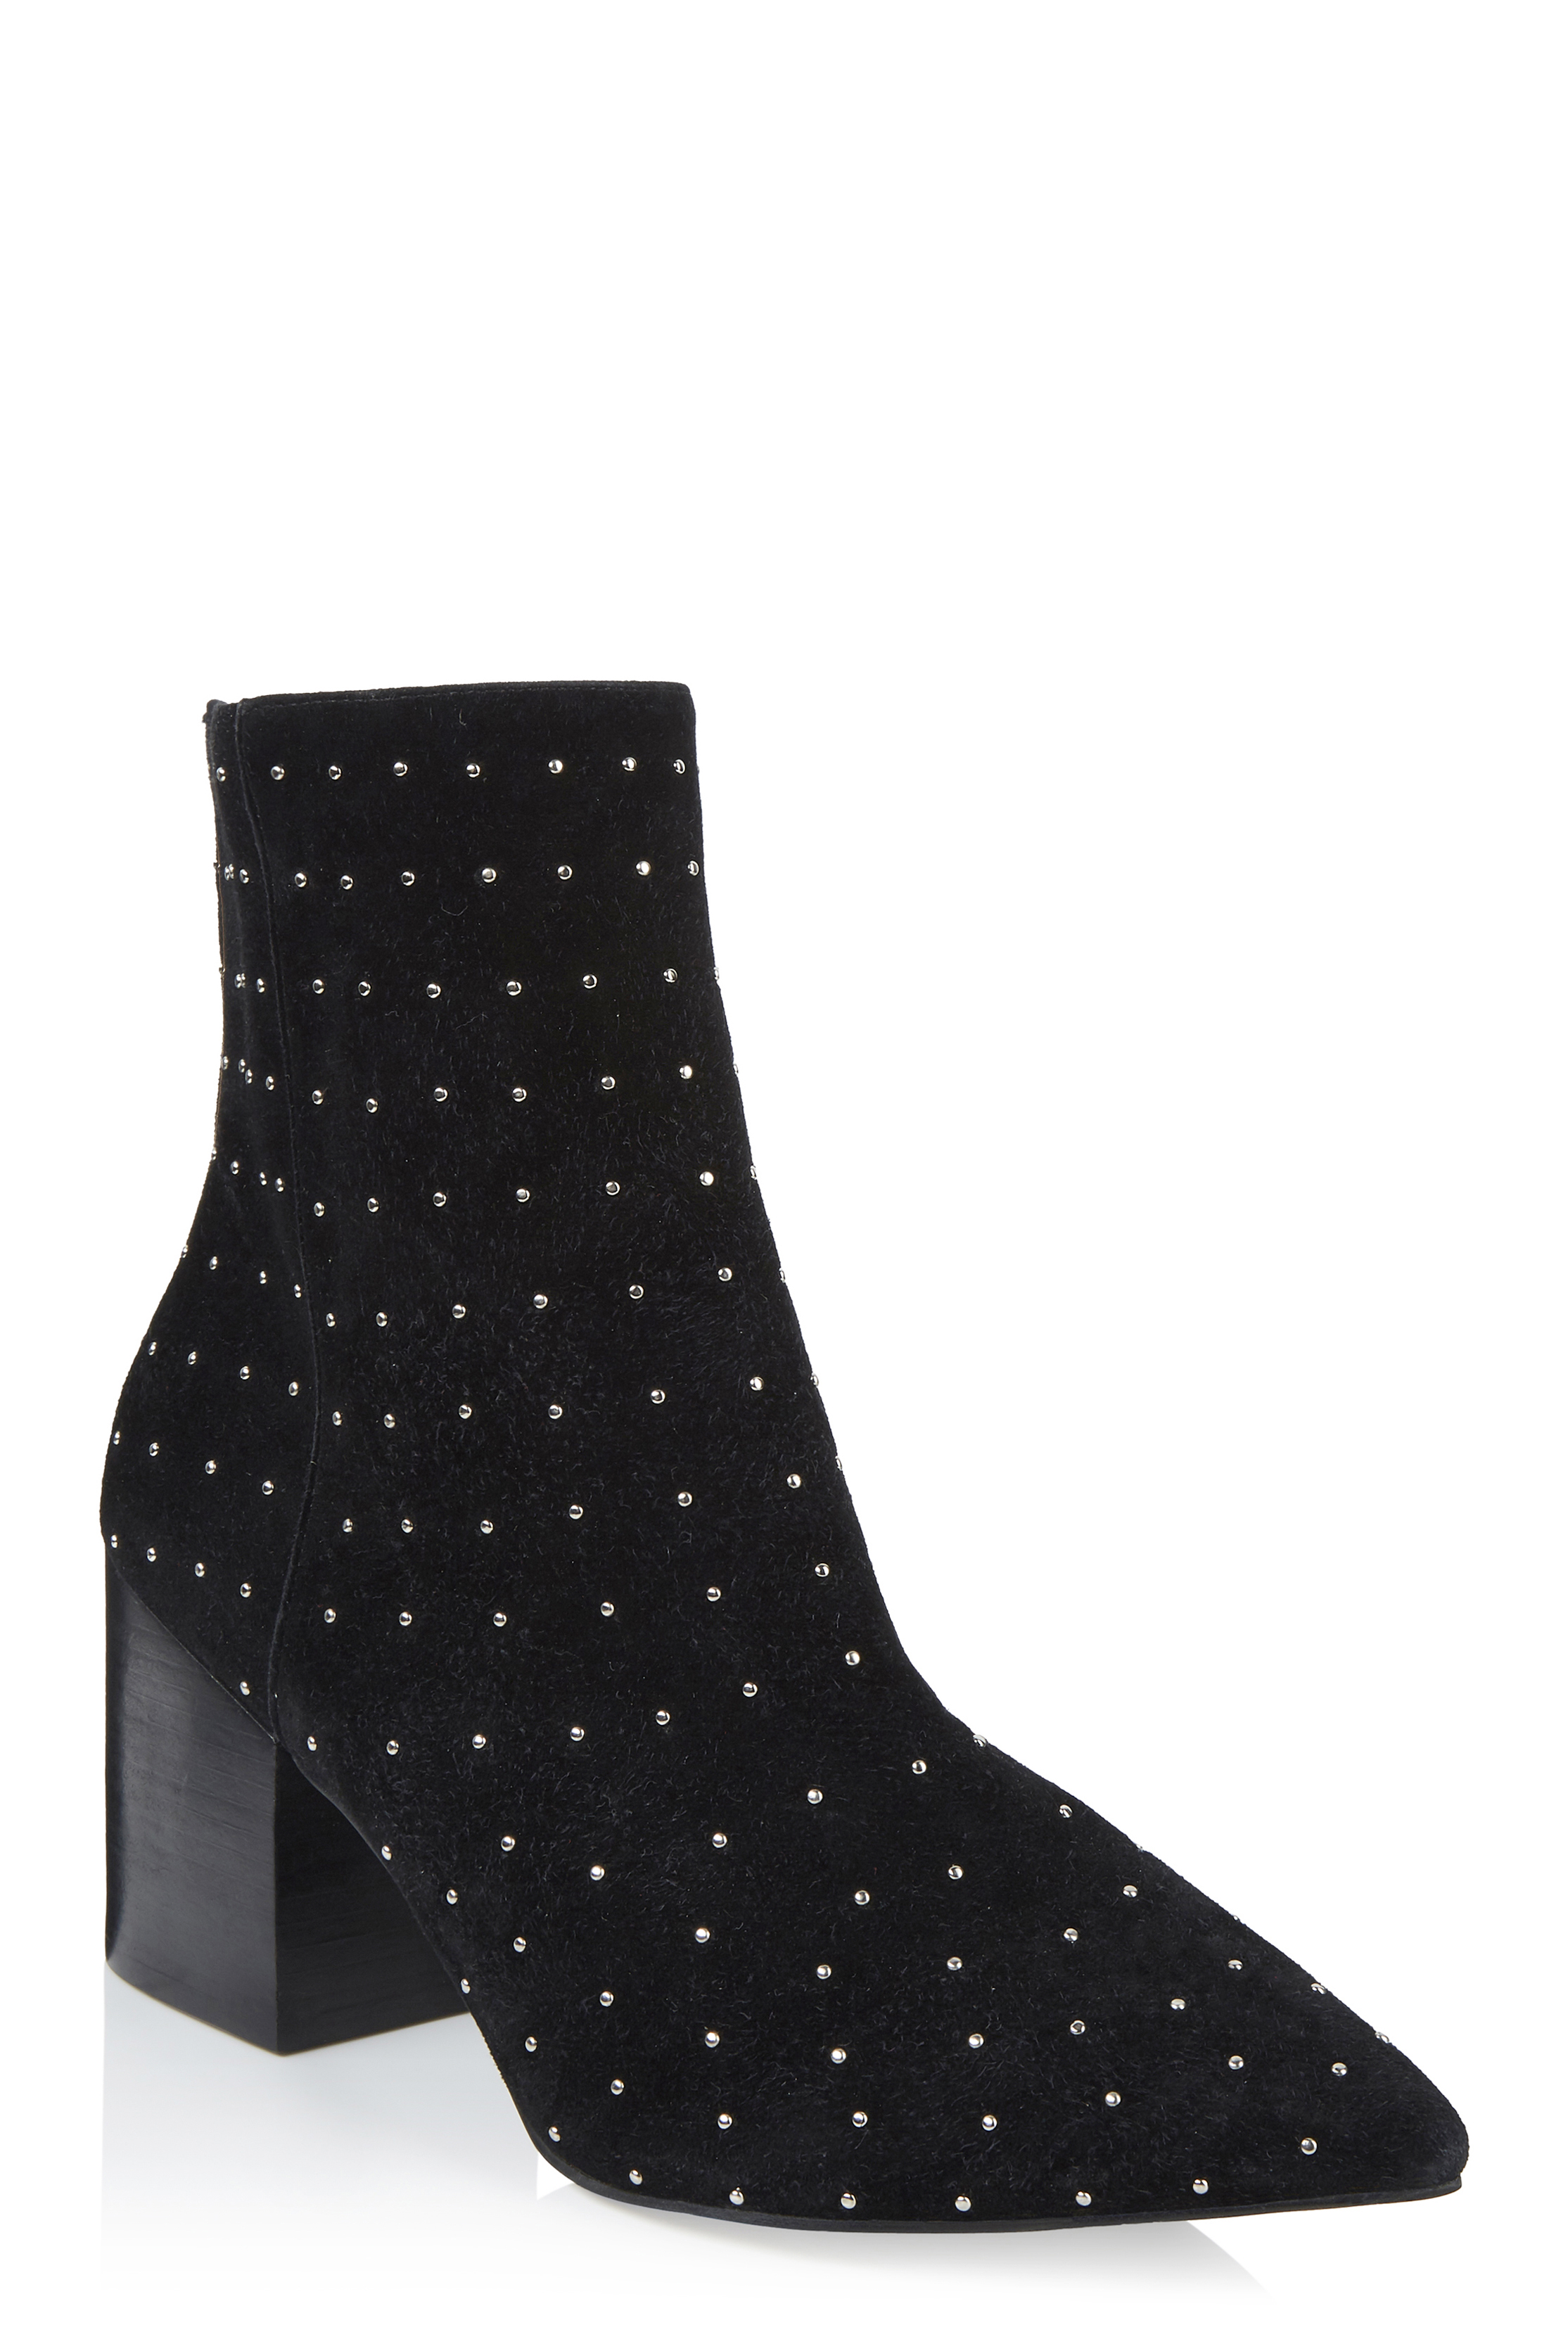 LTS Sorley Stud Suede Ankle Boot | Long Tall Sally